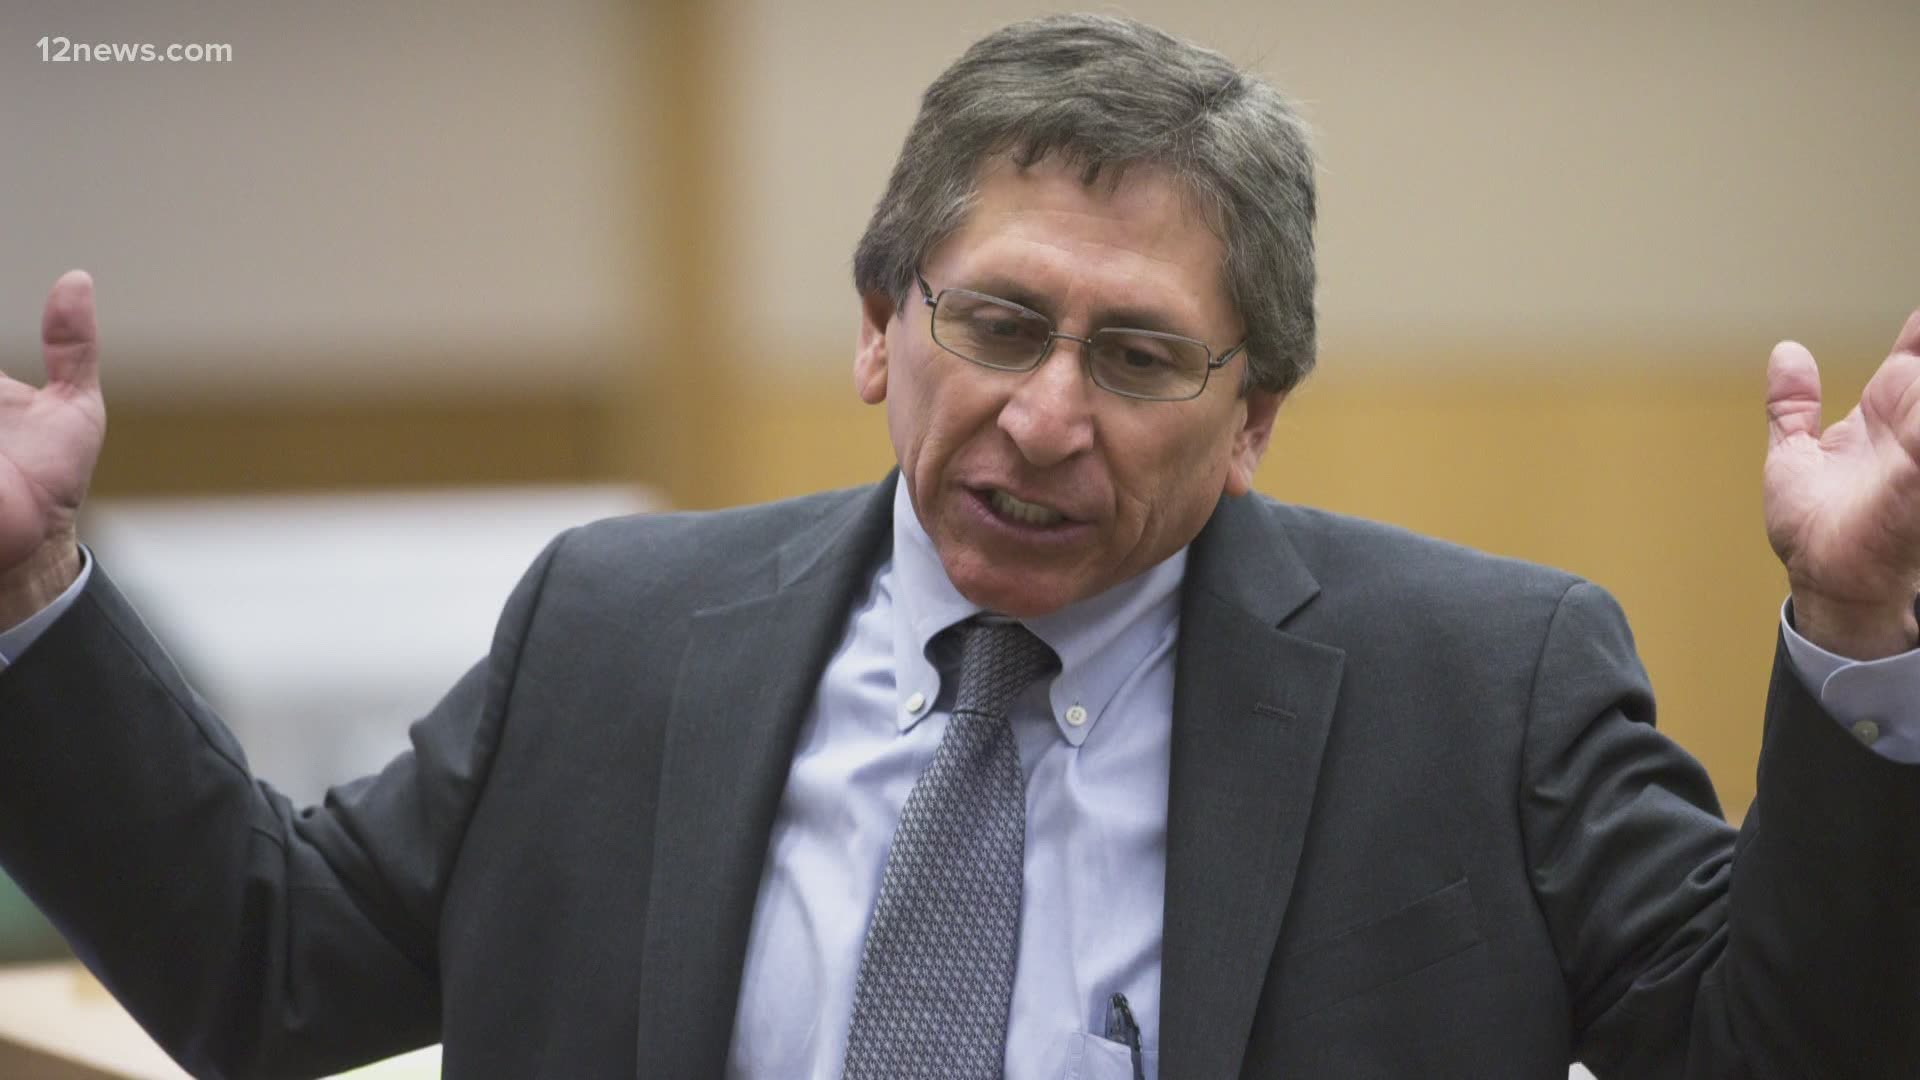 Despite Martinez's conduct during the Jodi Arias trial, she will not be retried. Martinez agreed to be disbarred.